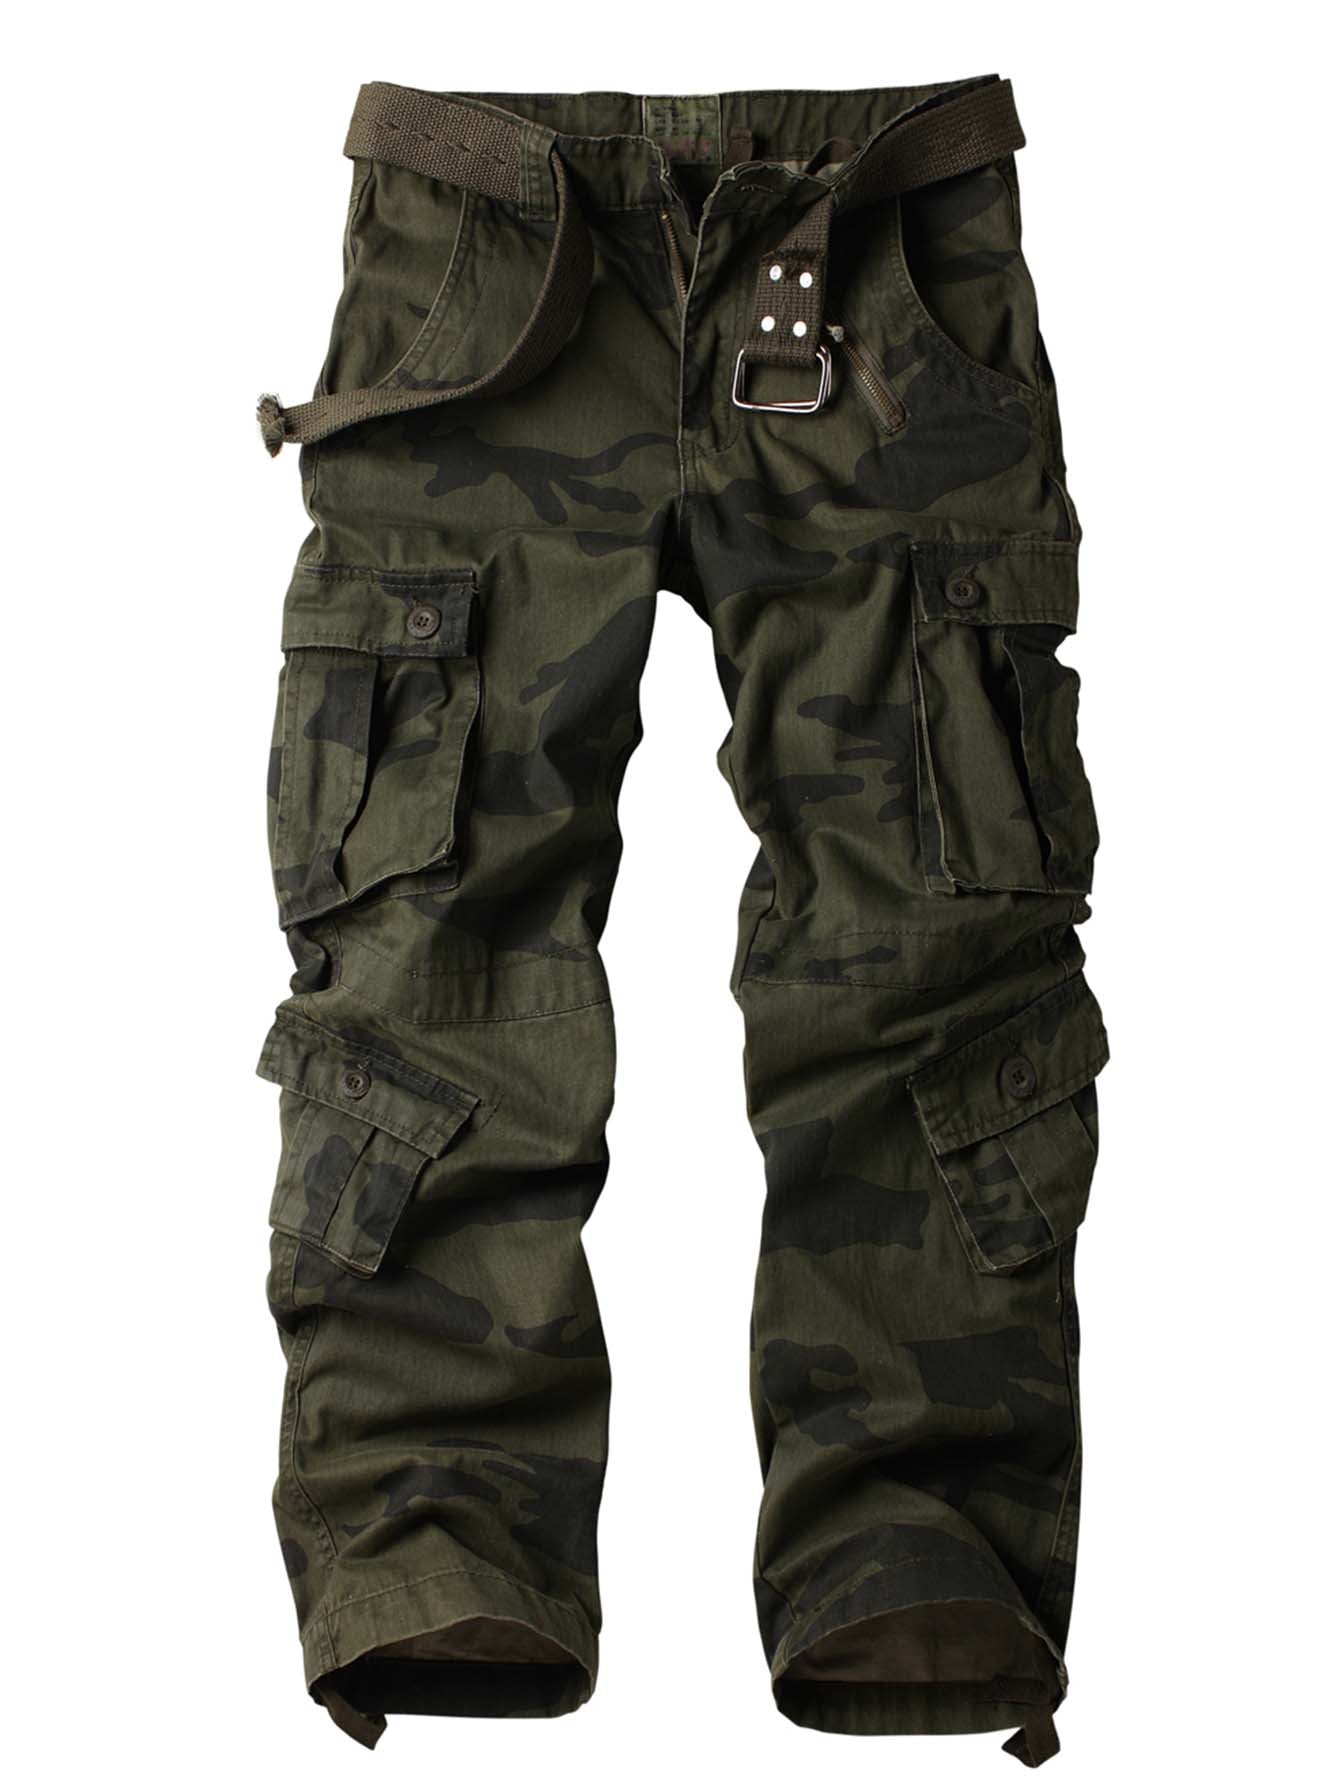 AKARMY Womens Cargo Pants with Pockets, Outdoor Casual Ripstop Military  Combat Construction Work Pants